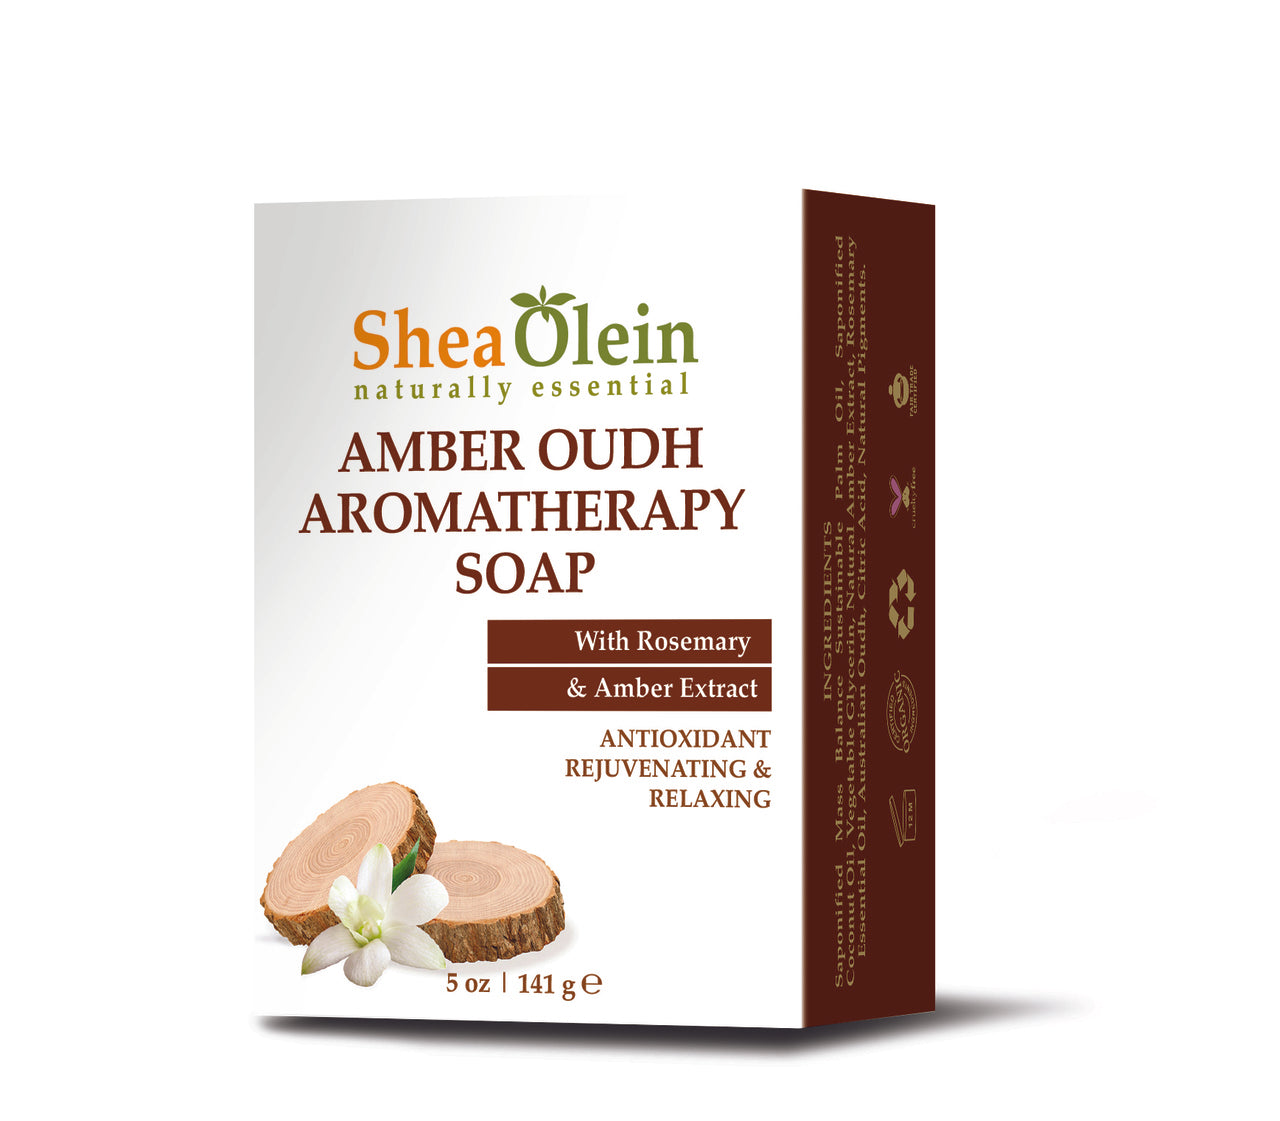 Amber Oudh Aromatherapy Soap with Rosemary & Amber Extract 5oz